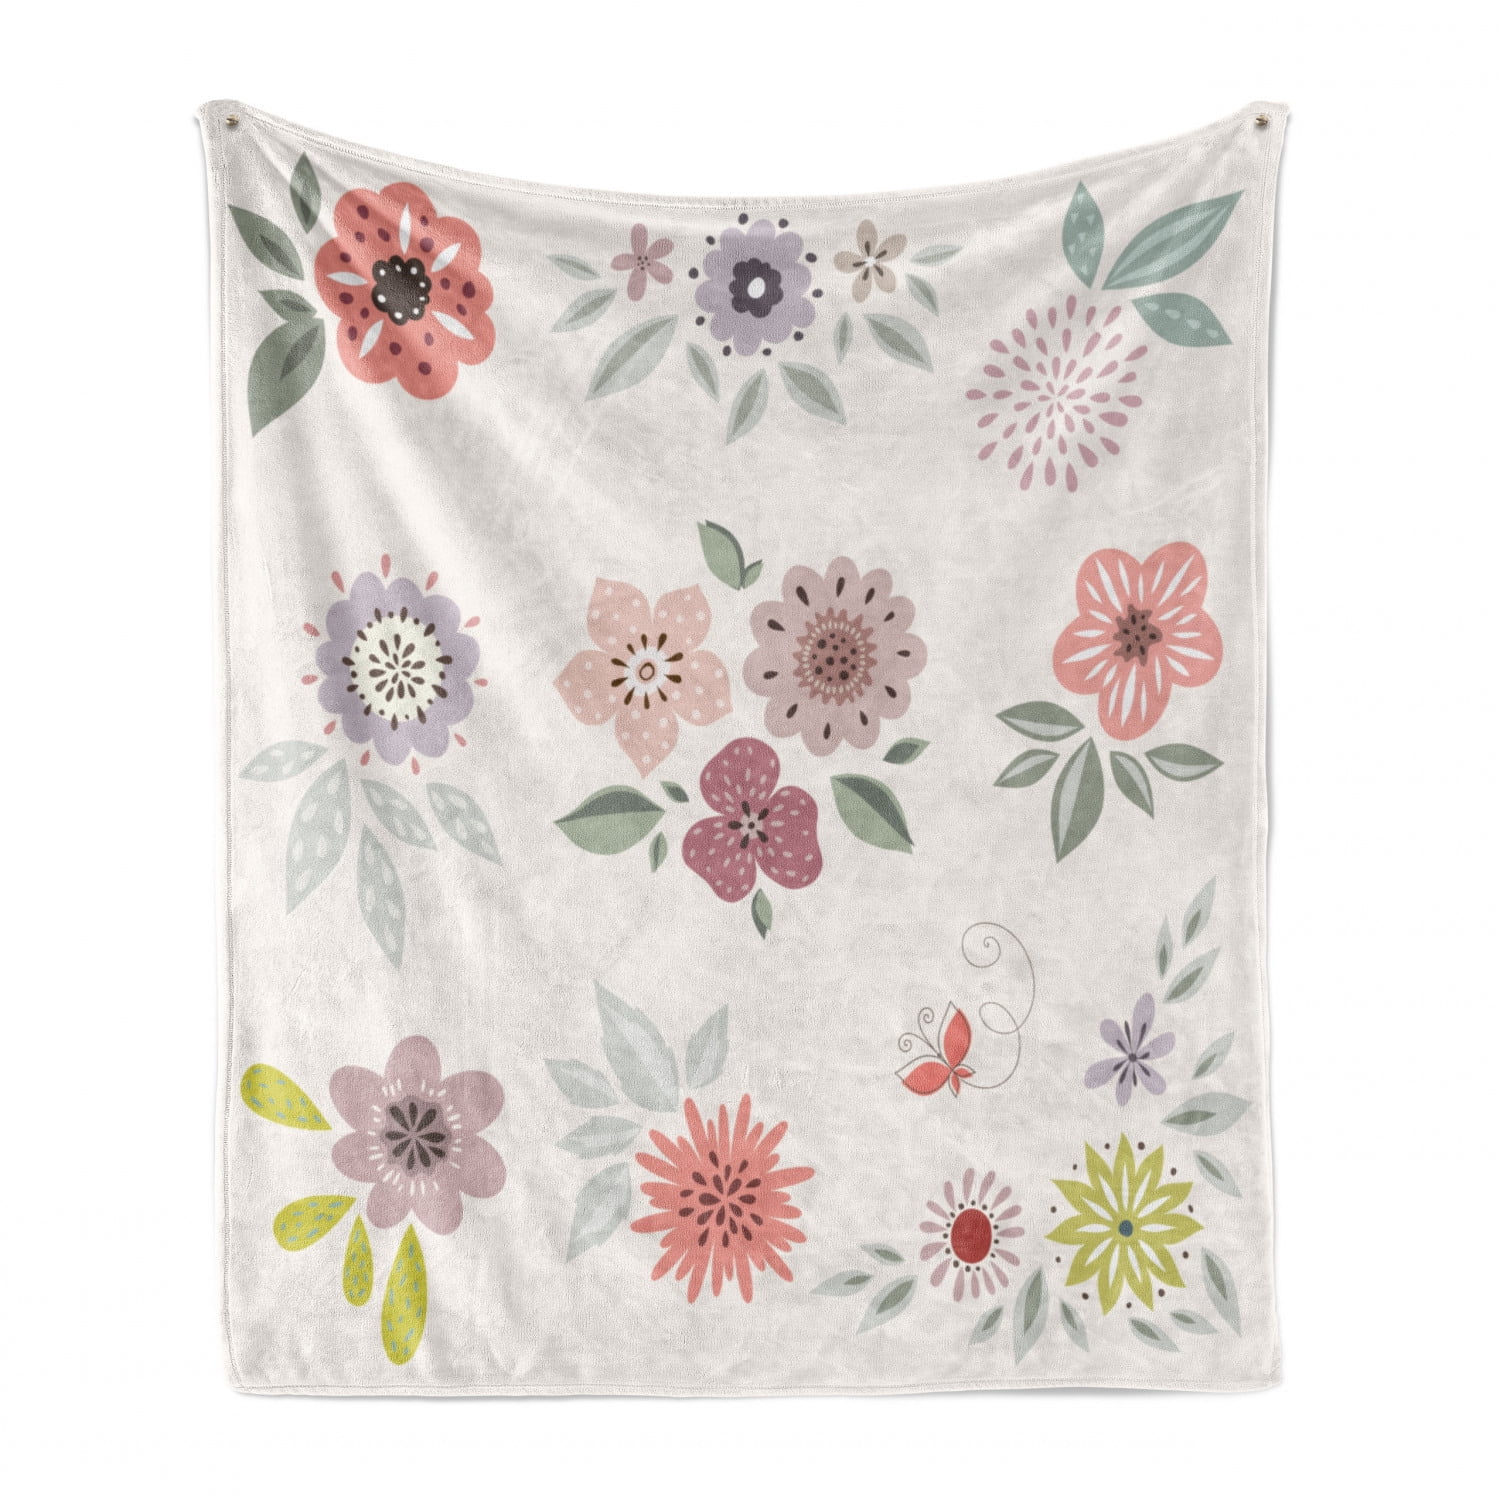 Flannel Fleece Accent Piece Soft Couch Cover for Adults Multicolor Vintage Traditional Style Hand Drawn Flowers and Leaves Composition in Pastel Tones 60 x 80 Ambesonne Floral Throw Blanket